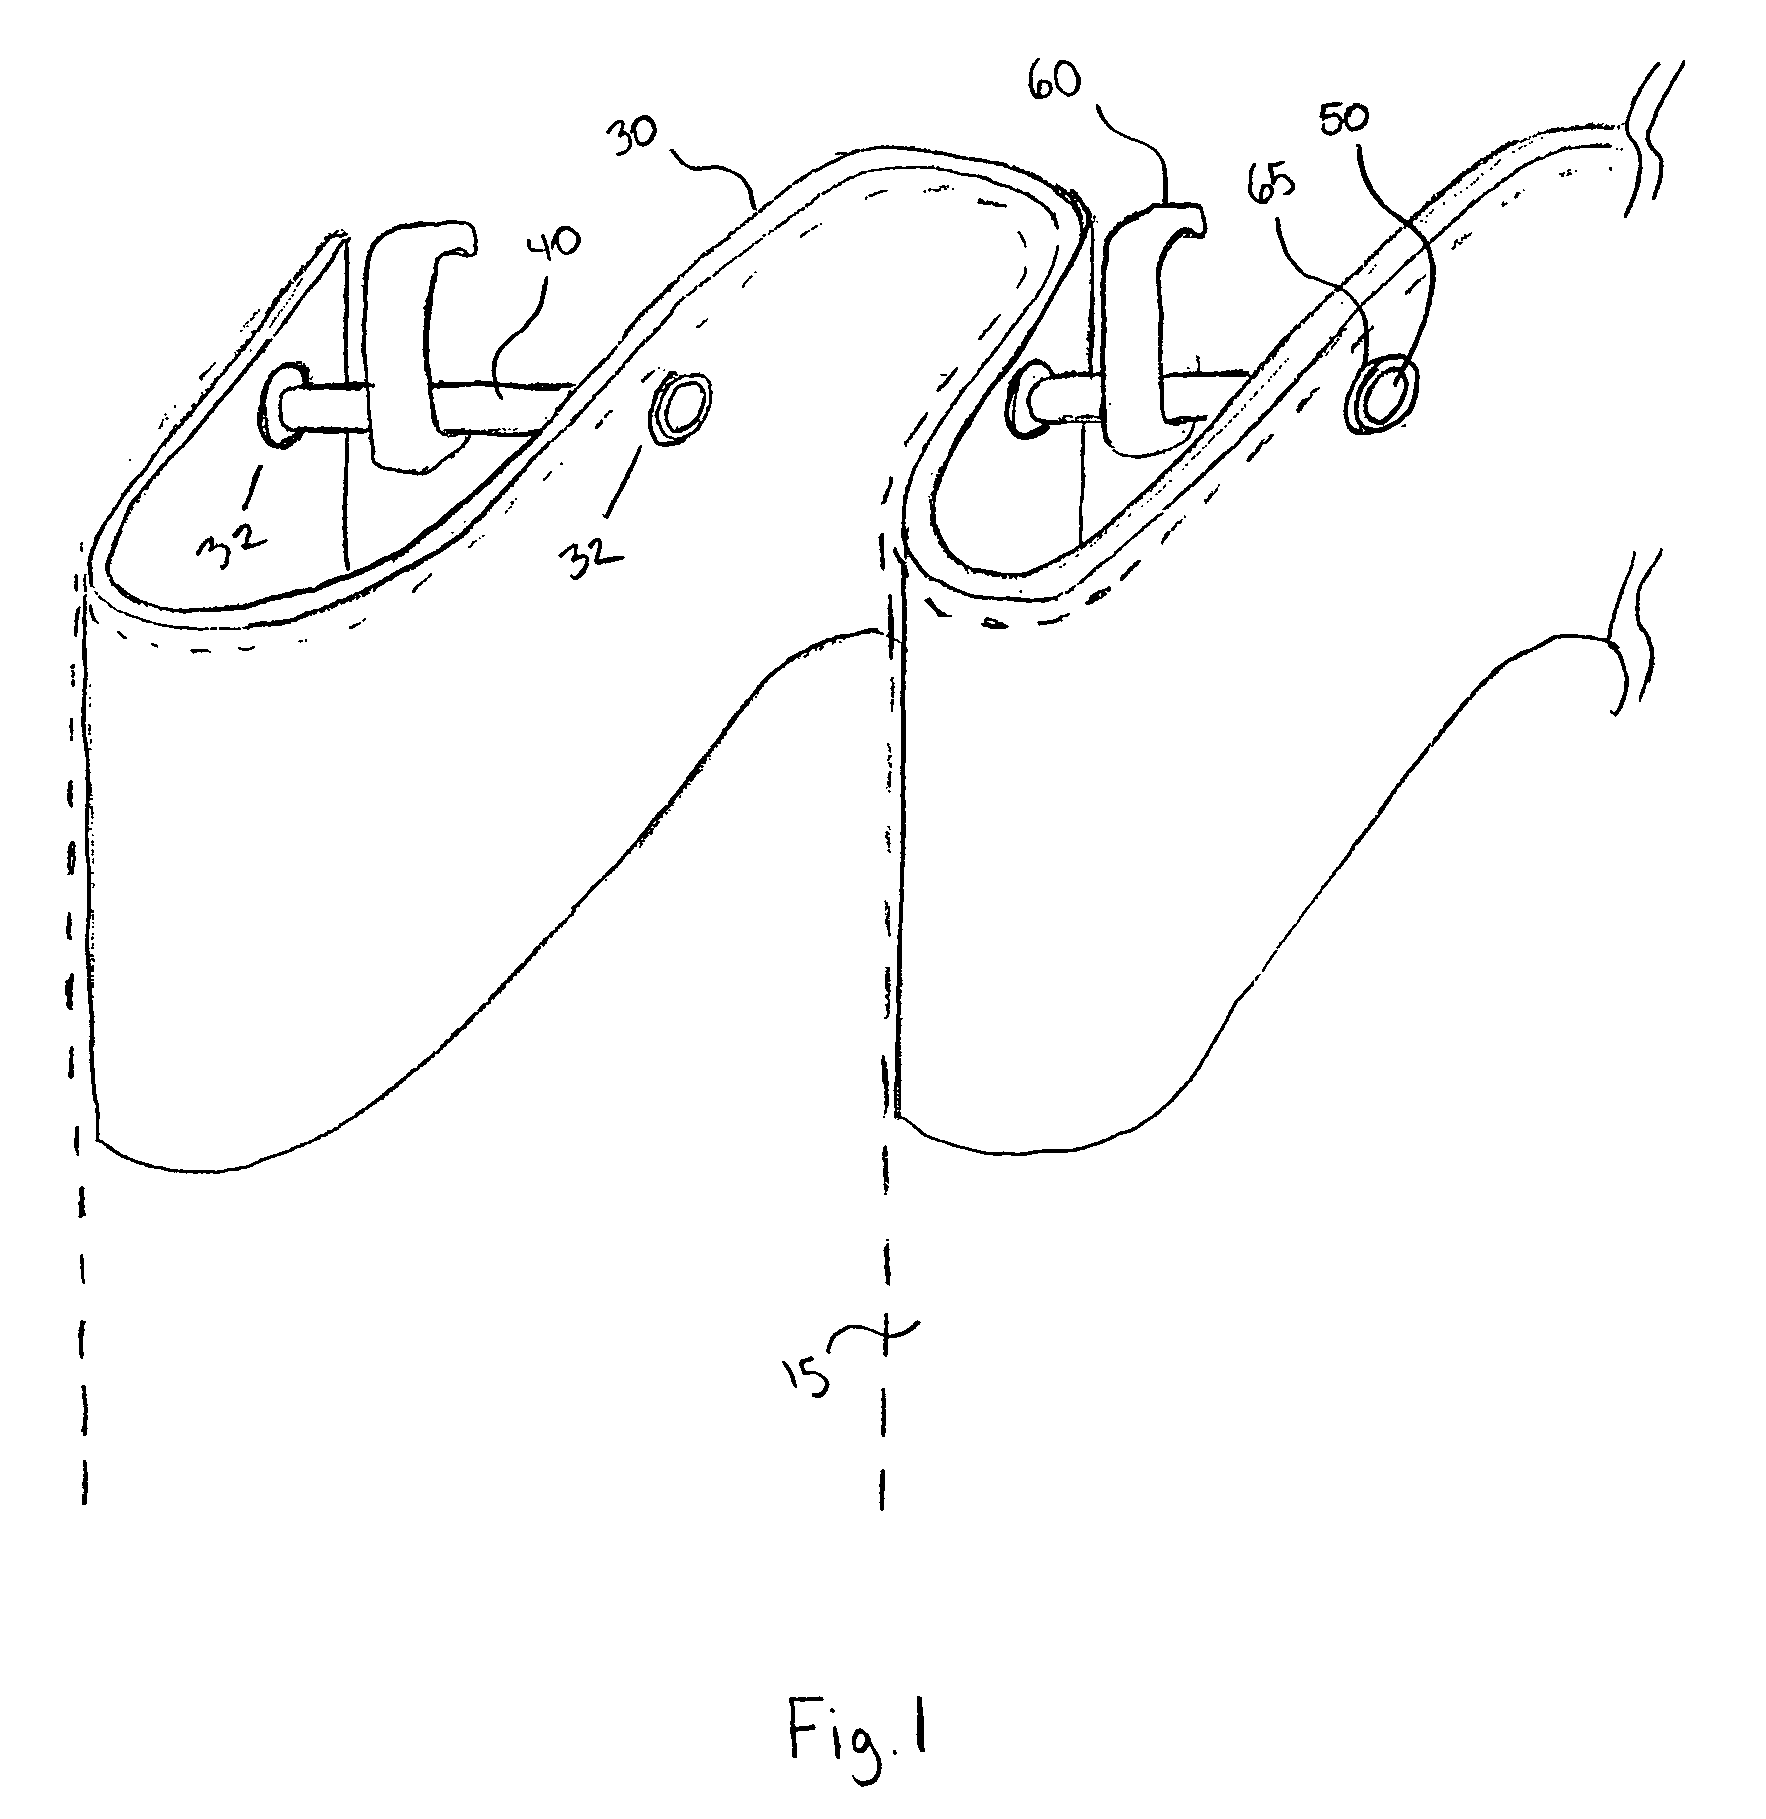 Method and apparatus for producing pleats in curtains and pleated curtains and hanging said curtains using said apparatus